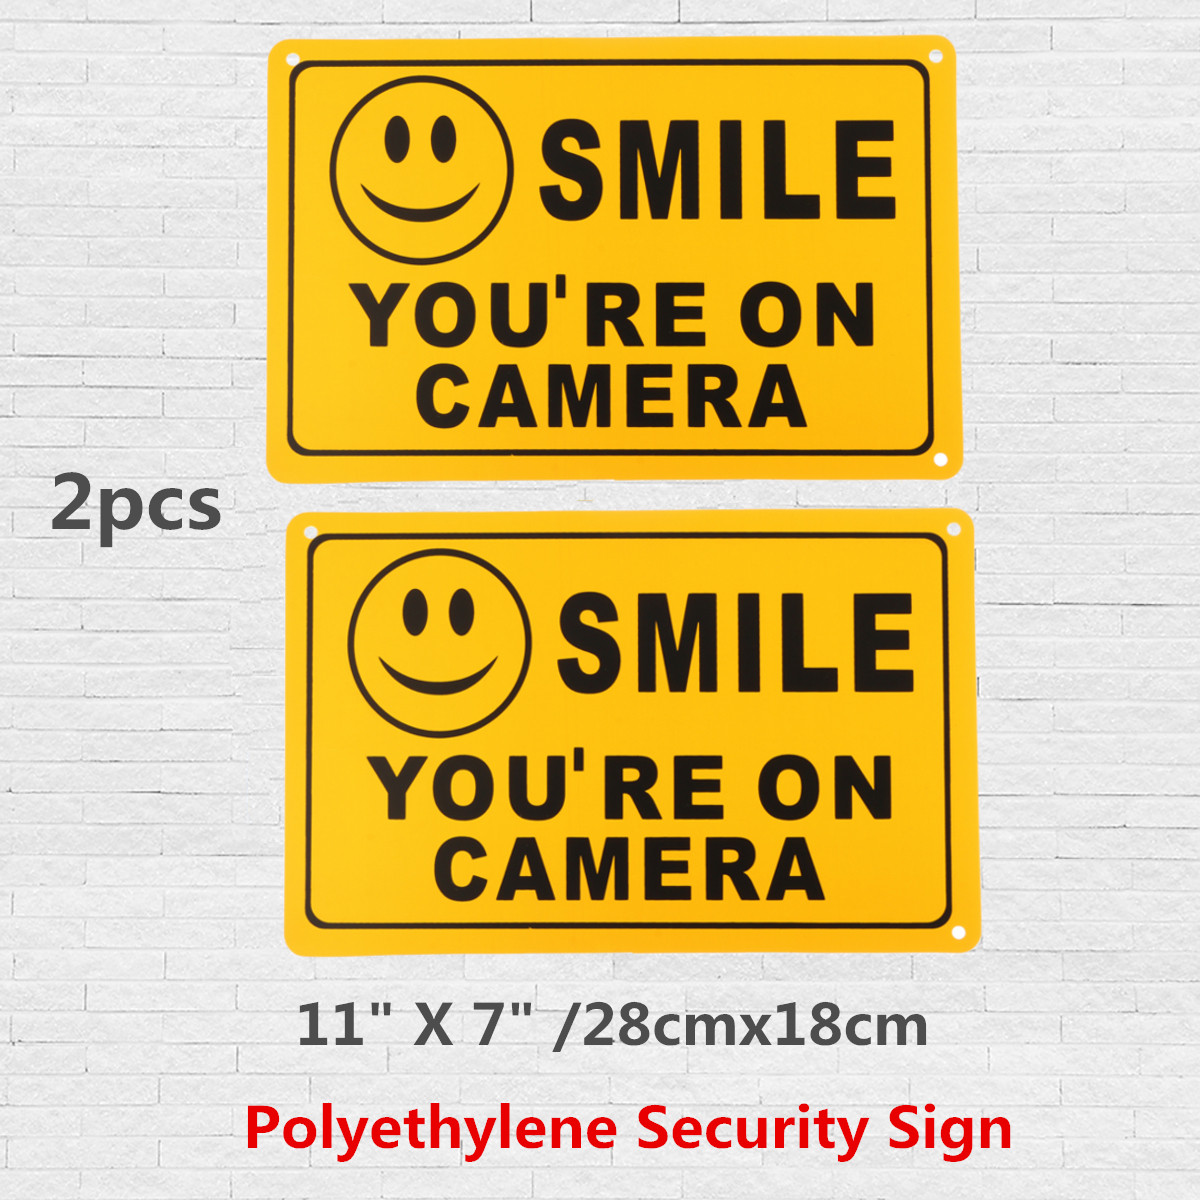 2Pcs-SMILE-YOURE-ON-CAMERA-Warning-Security-Yellow-Sign-CCTV-Video-Surveillance-Camera-Sticker-28x18-1180754-9